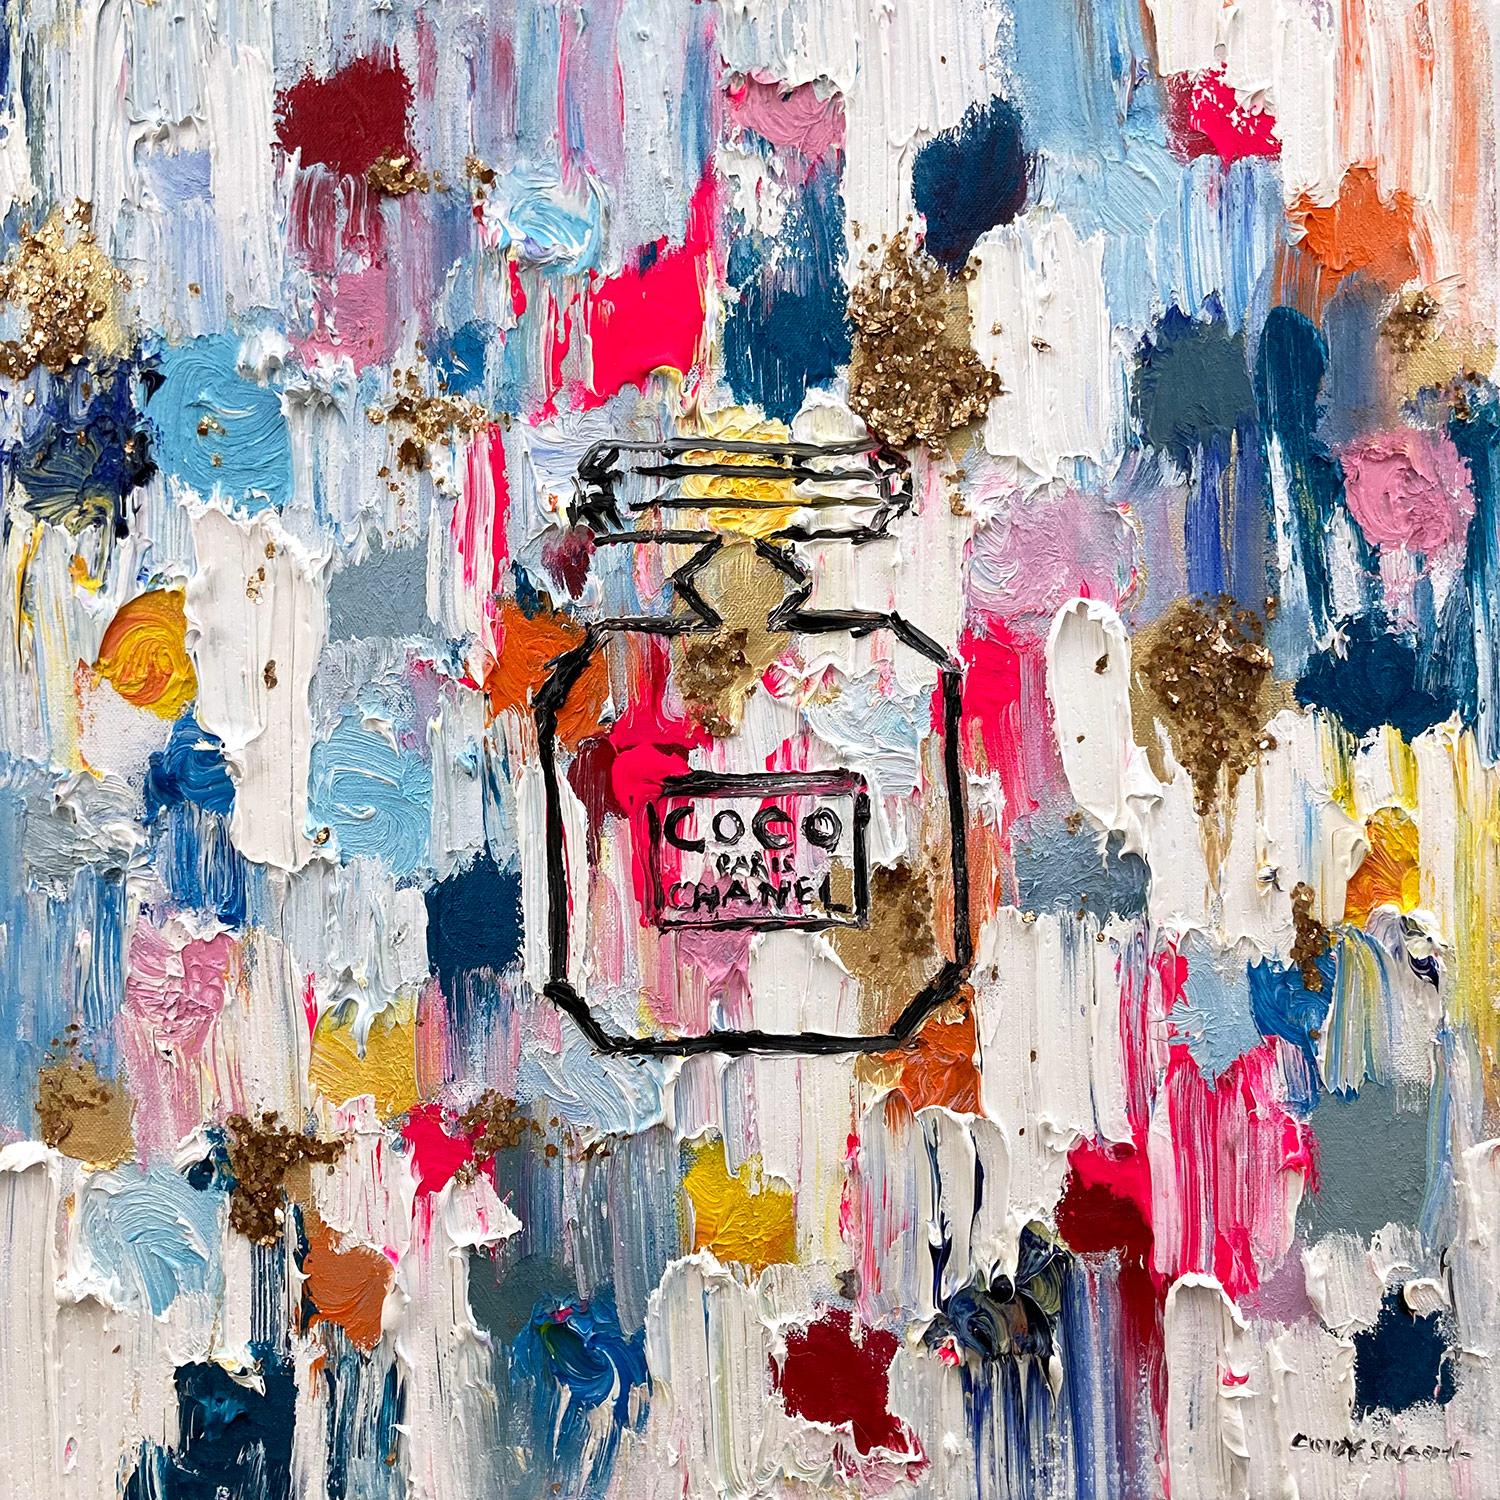 Cindy Shaoul Still-Life Painting - "Dripping Dots - Coco in Portofino" Pop Art Chanel Perfume Bottle Oil Painting